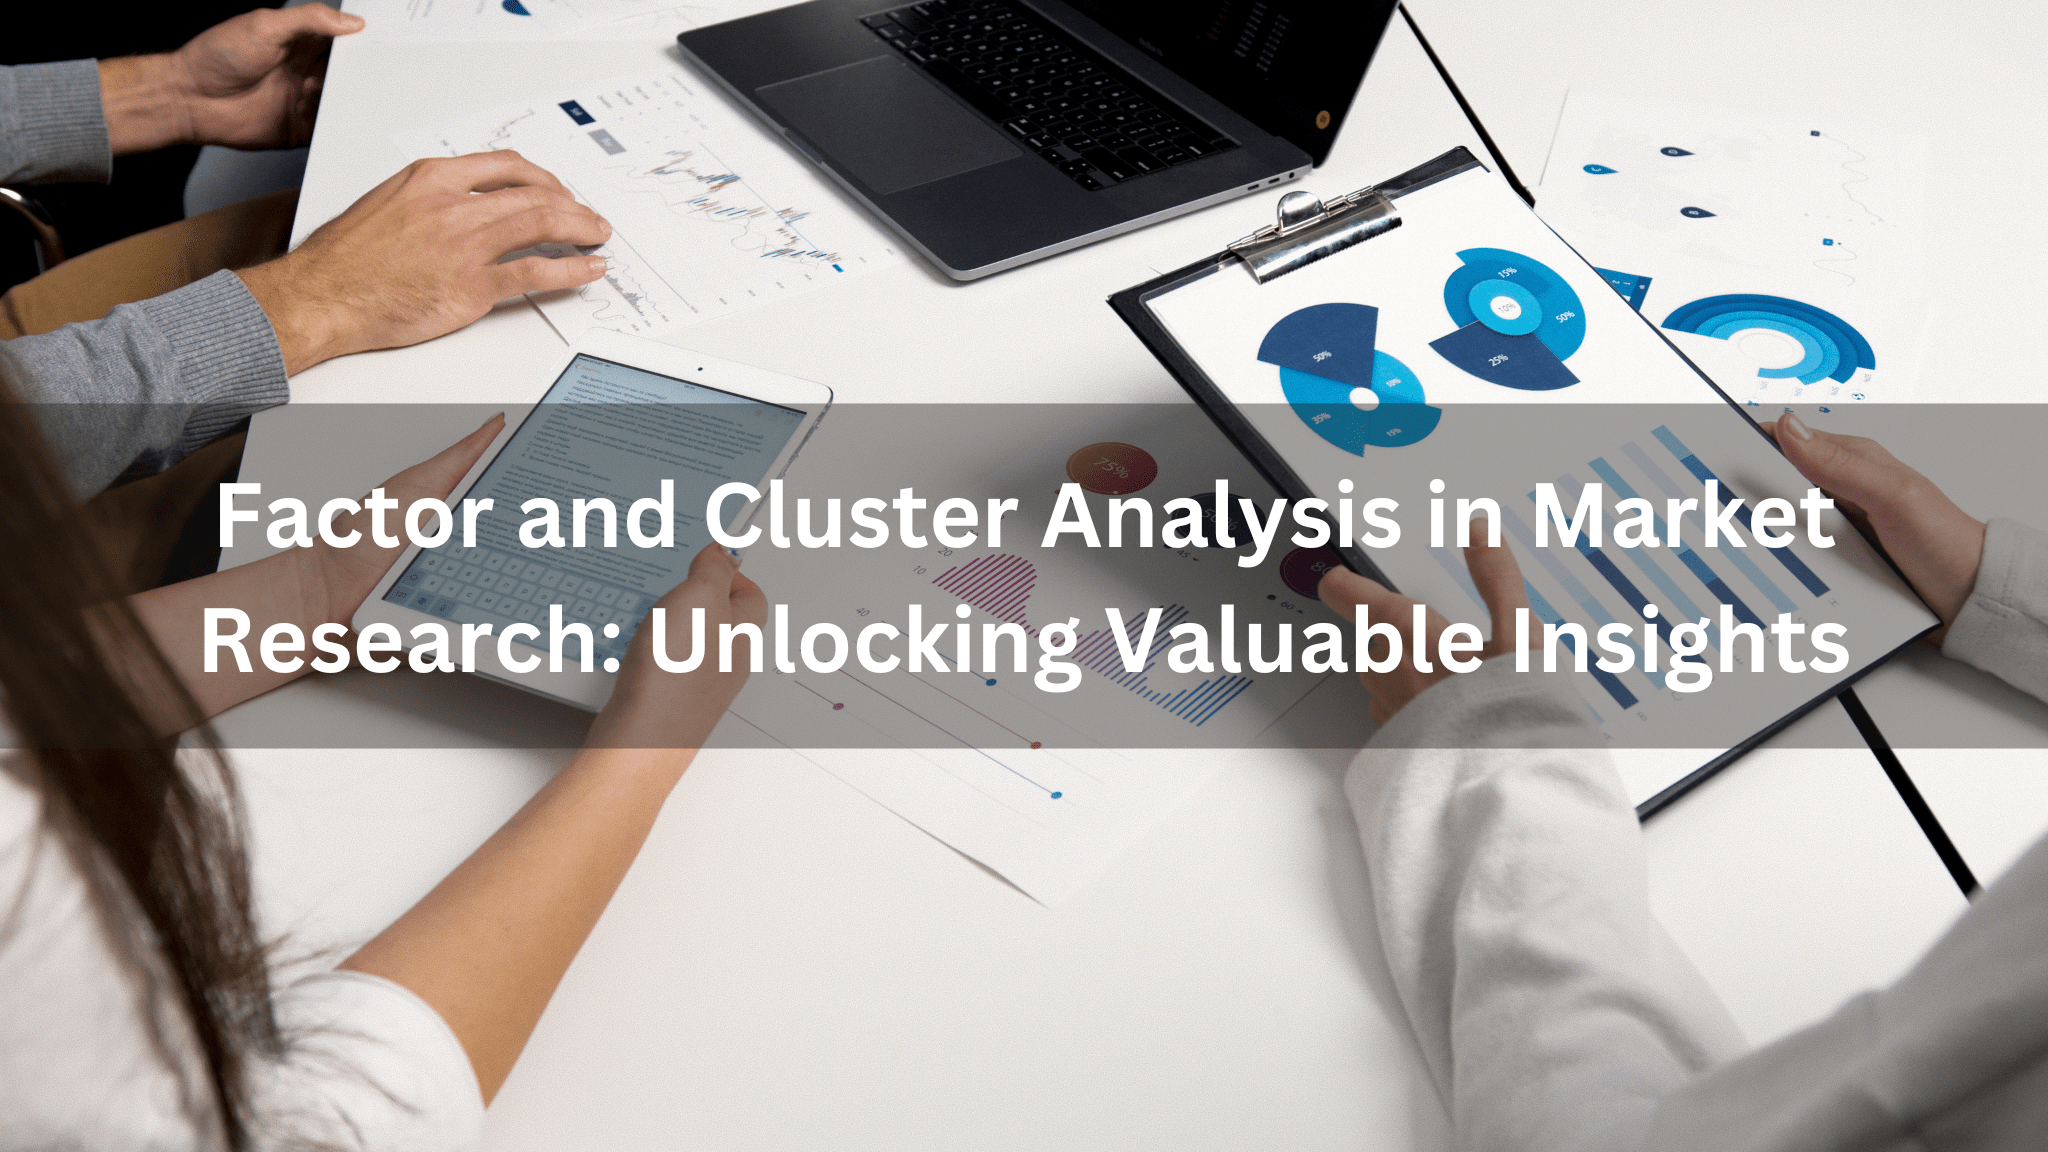 Factor and Cluster Analysis